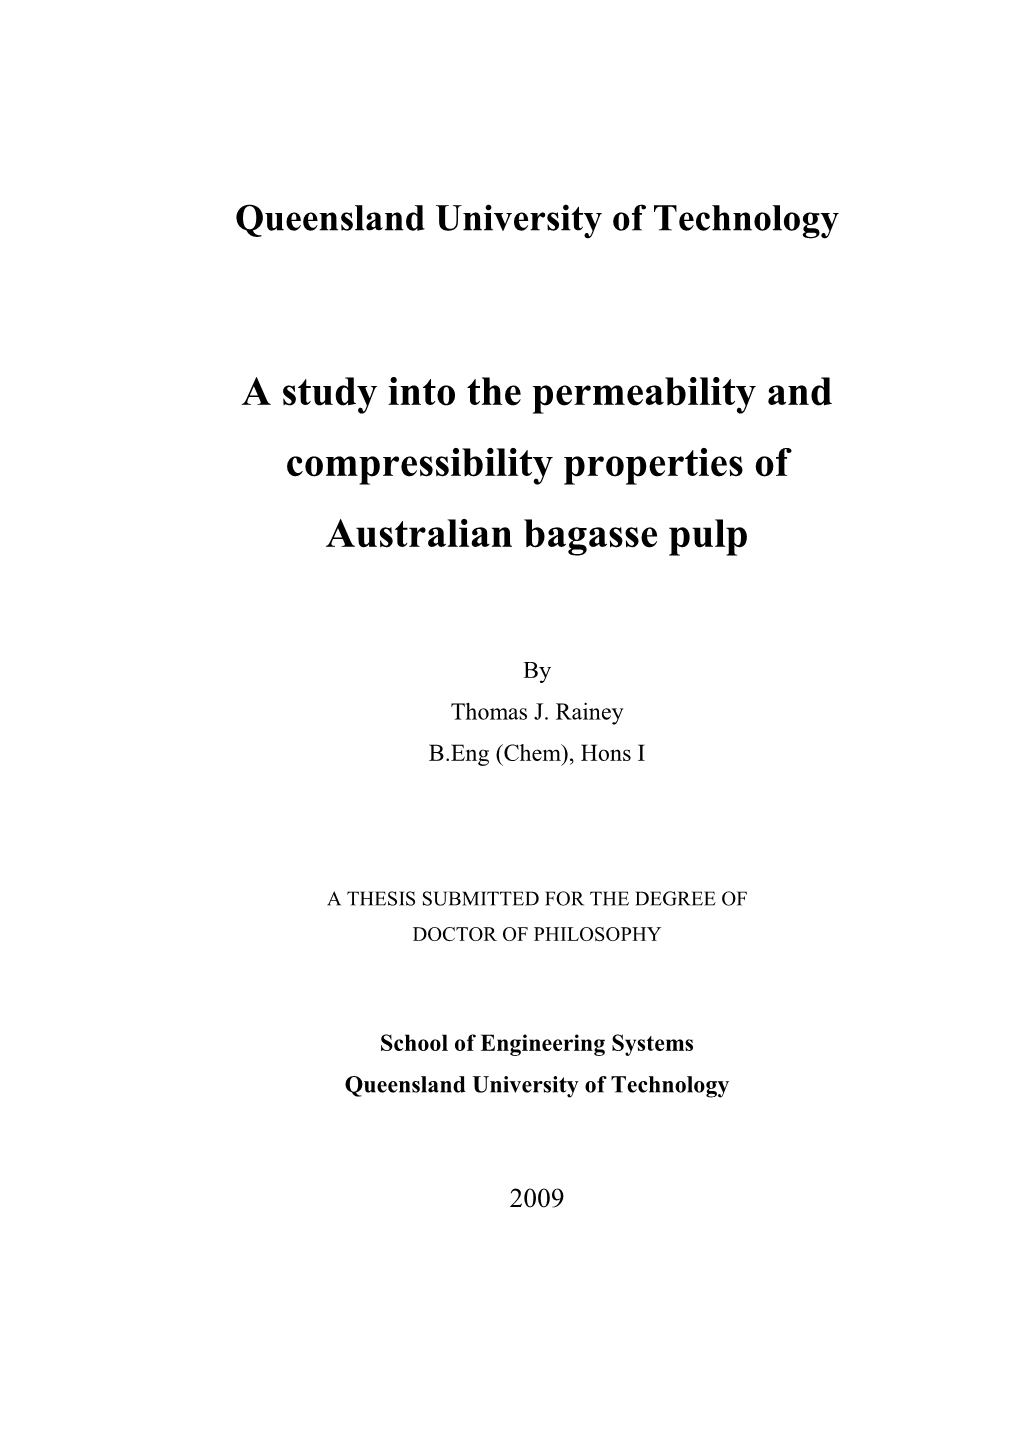 A Study Into the Permeability and Compressibility Properties of Australian Bagasse Pulp